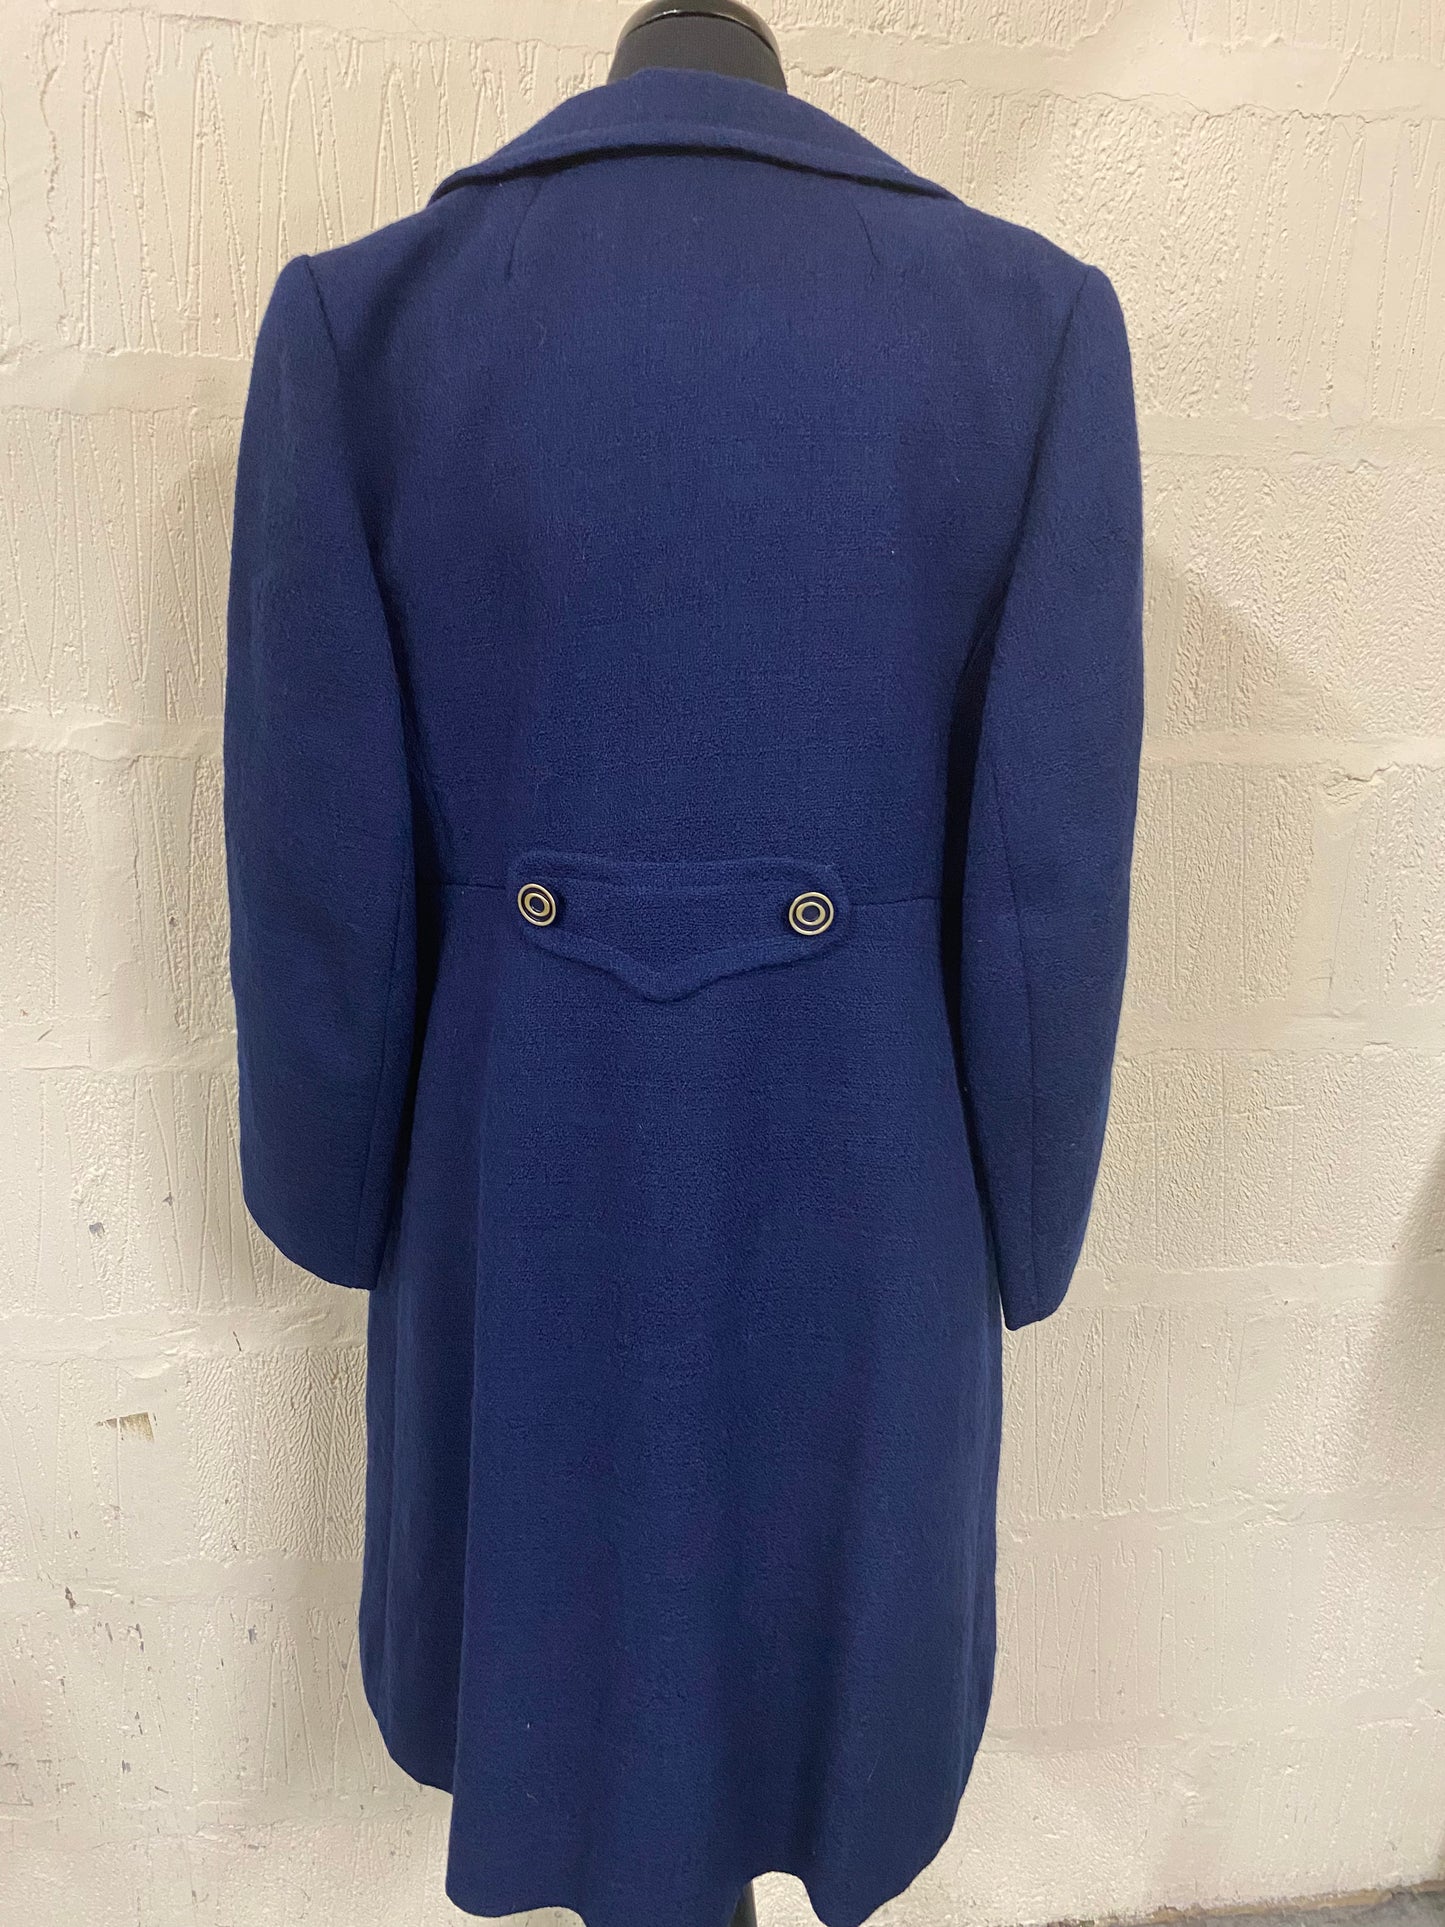 Vintage Mansfield by Frank Russell Navy Wool Jacket Dress Size 12-14